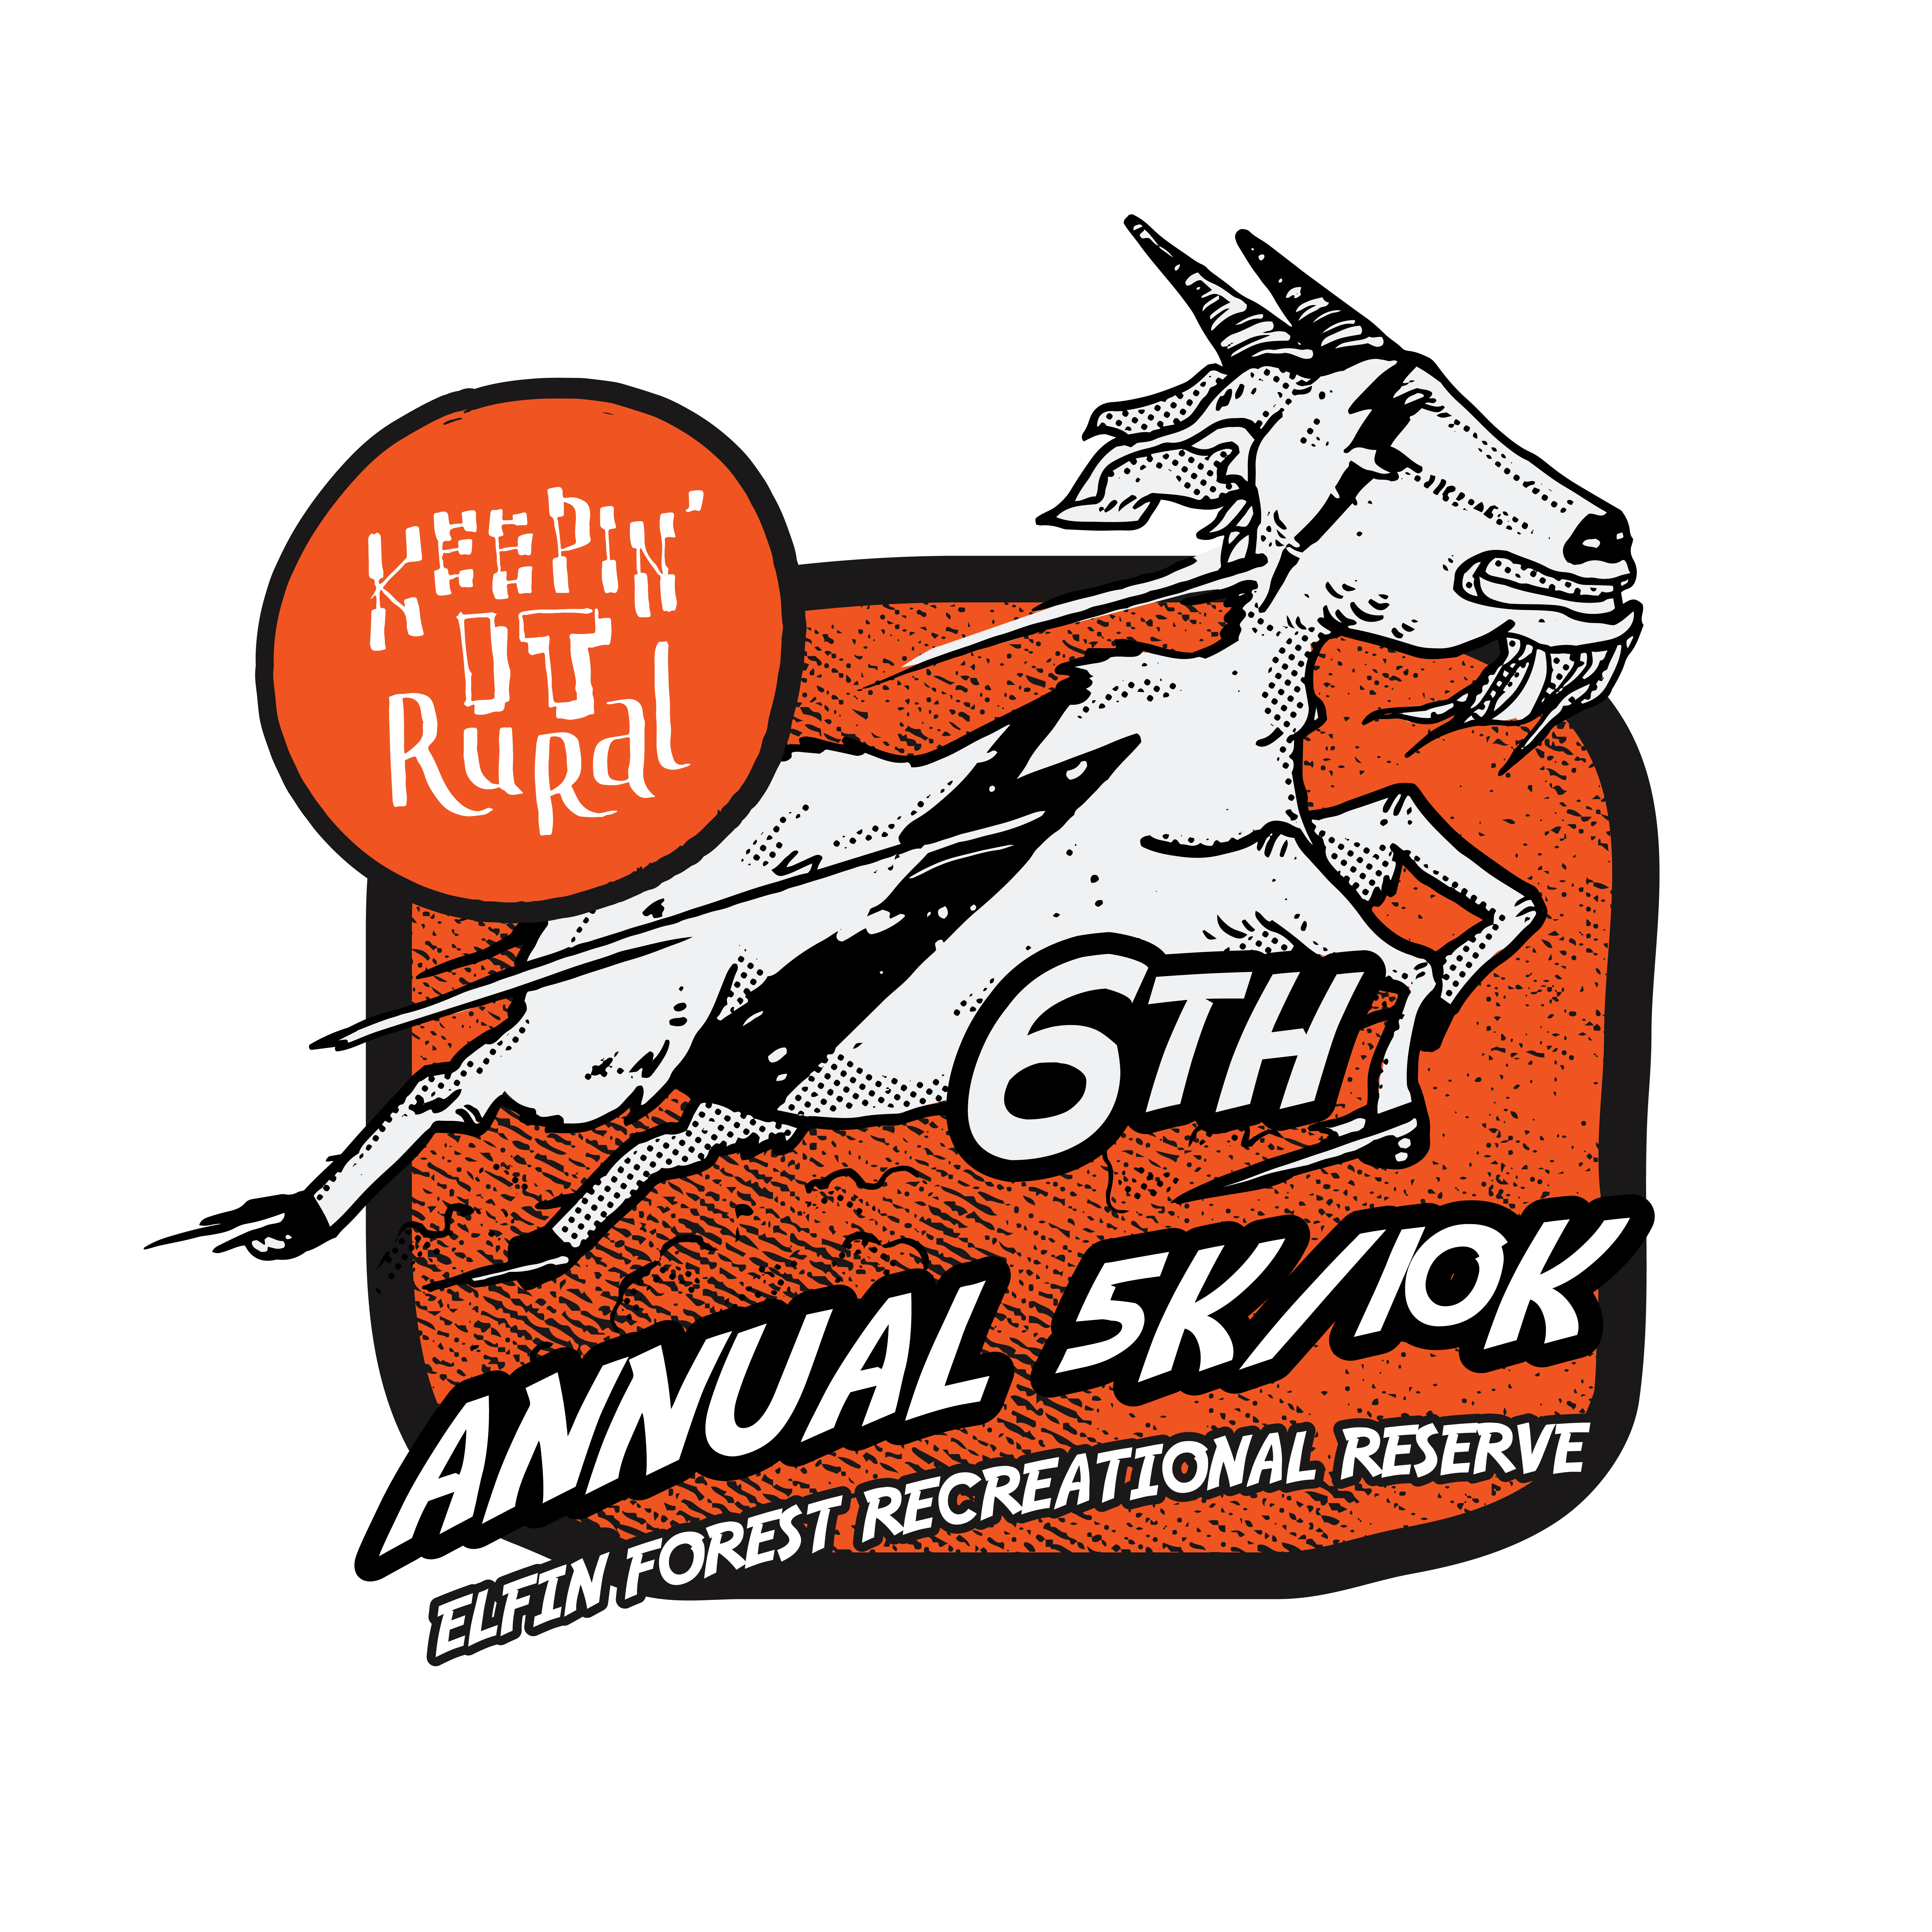 Trail race 5K t-shirt with goat illustration - GUARANTEED